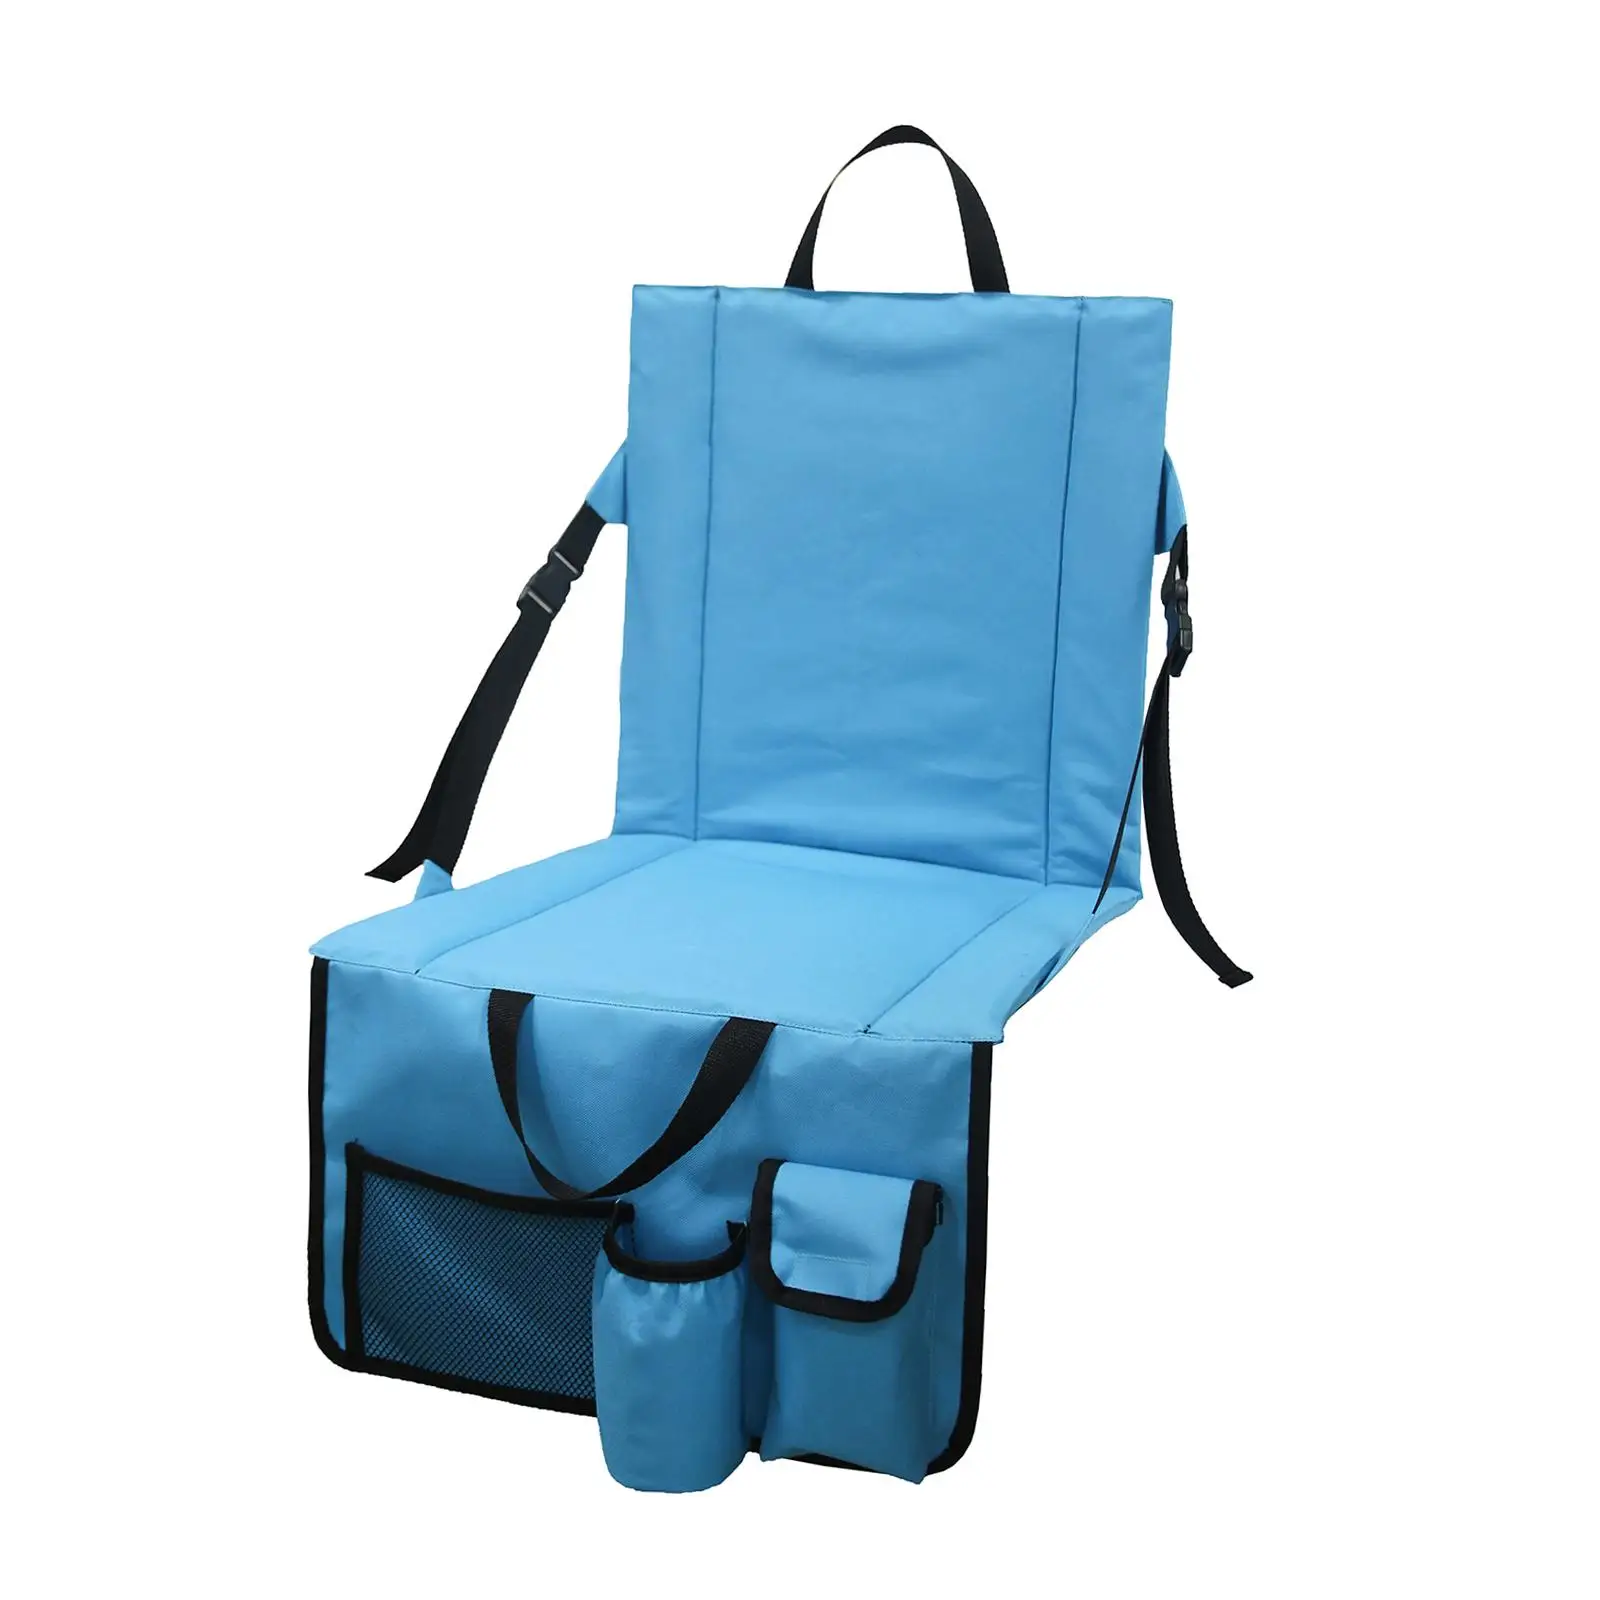 Folding Stadium Chair with Pocket Padded Cushion Lightweight Mat Wide for Camping Beach Picnic Outdoor Barbecue